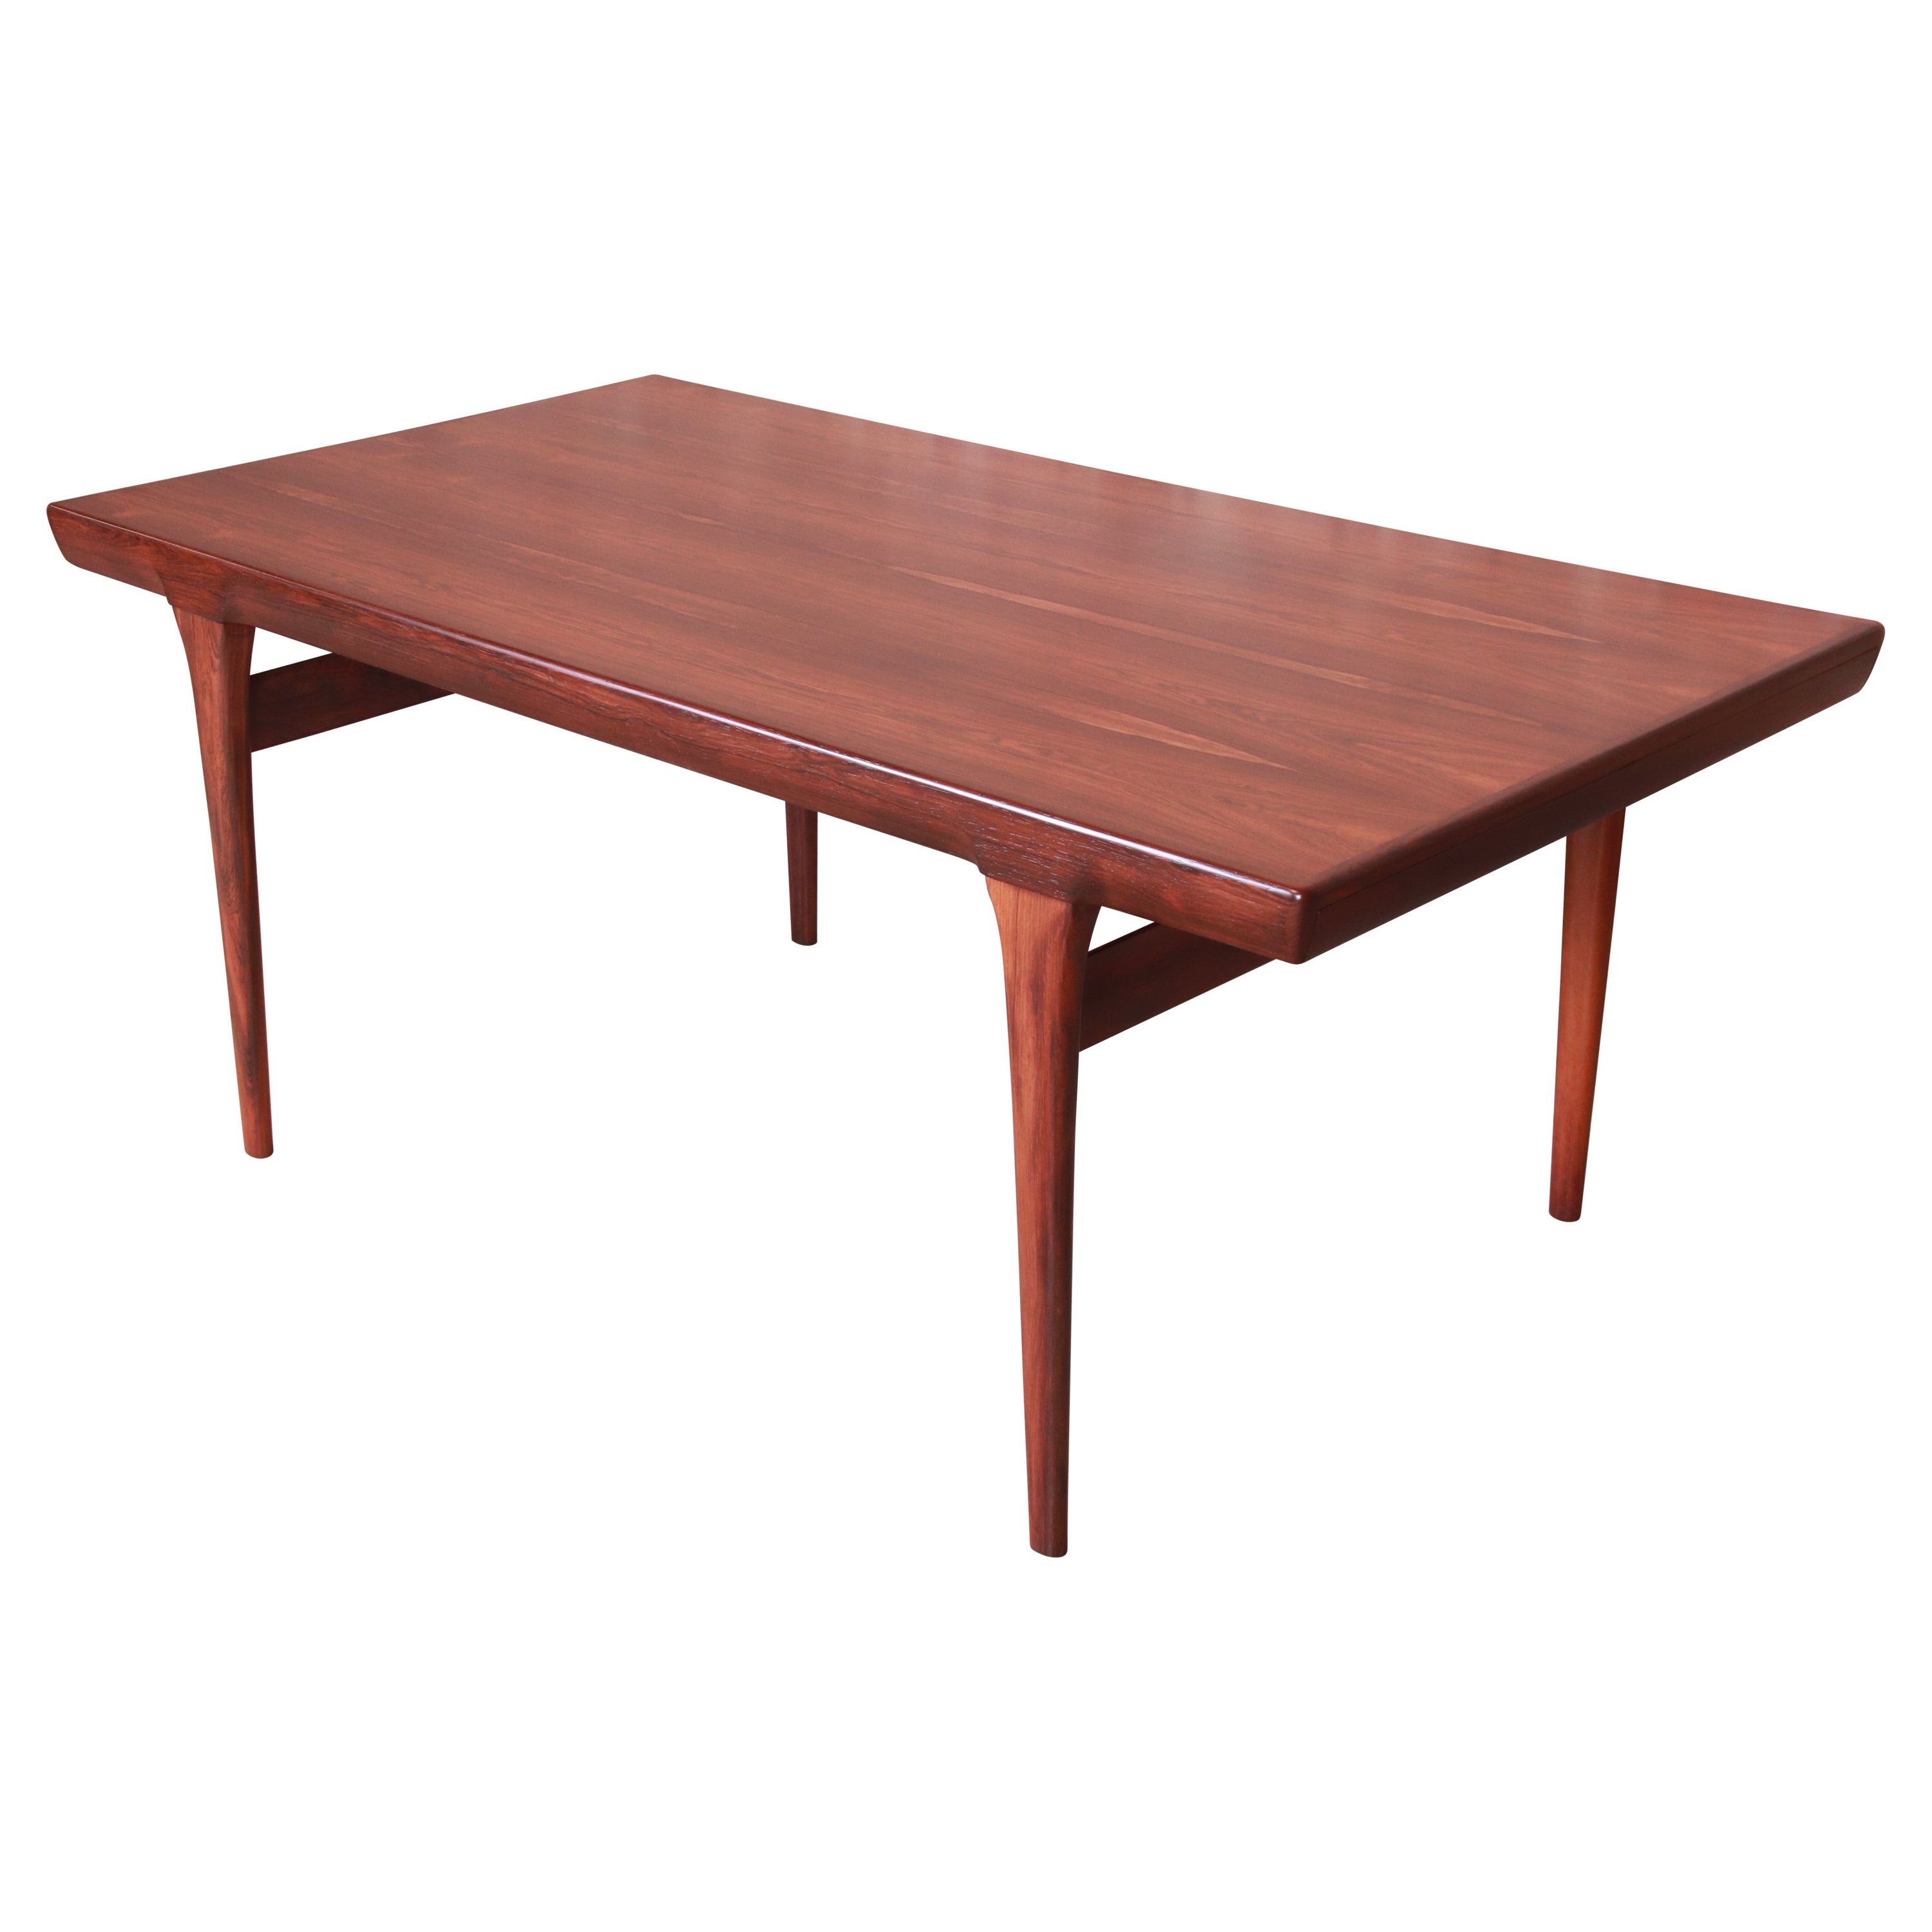 Ib Kofod-Larsen for Faarup Danish Modern Rosewood Dining Table, Newly Refinished For Sale